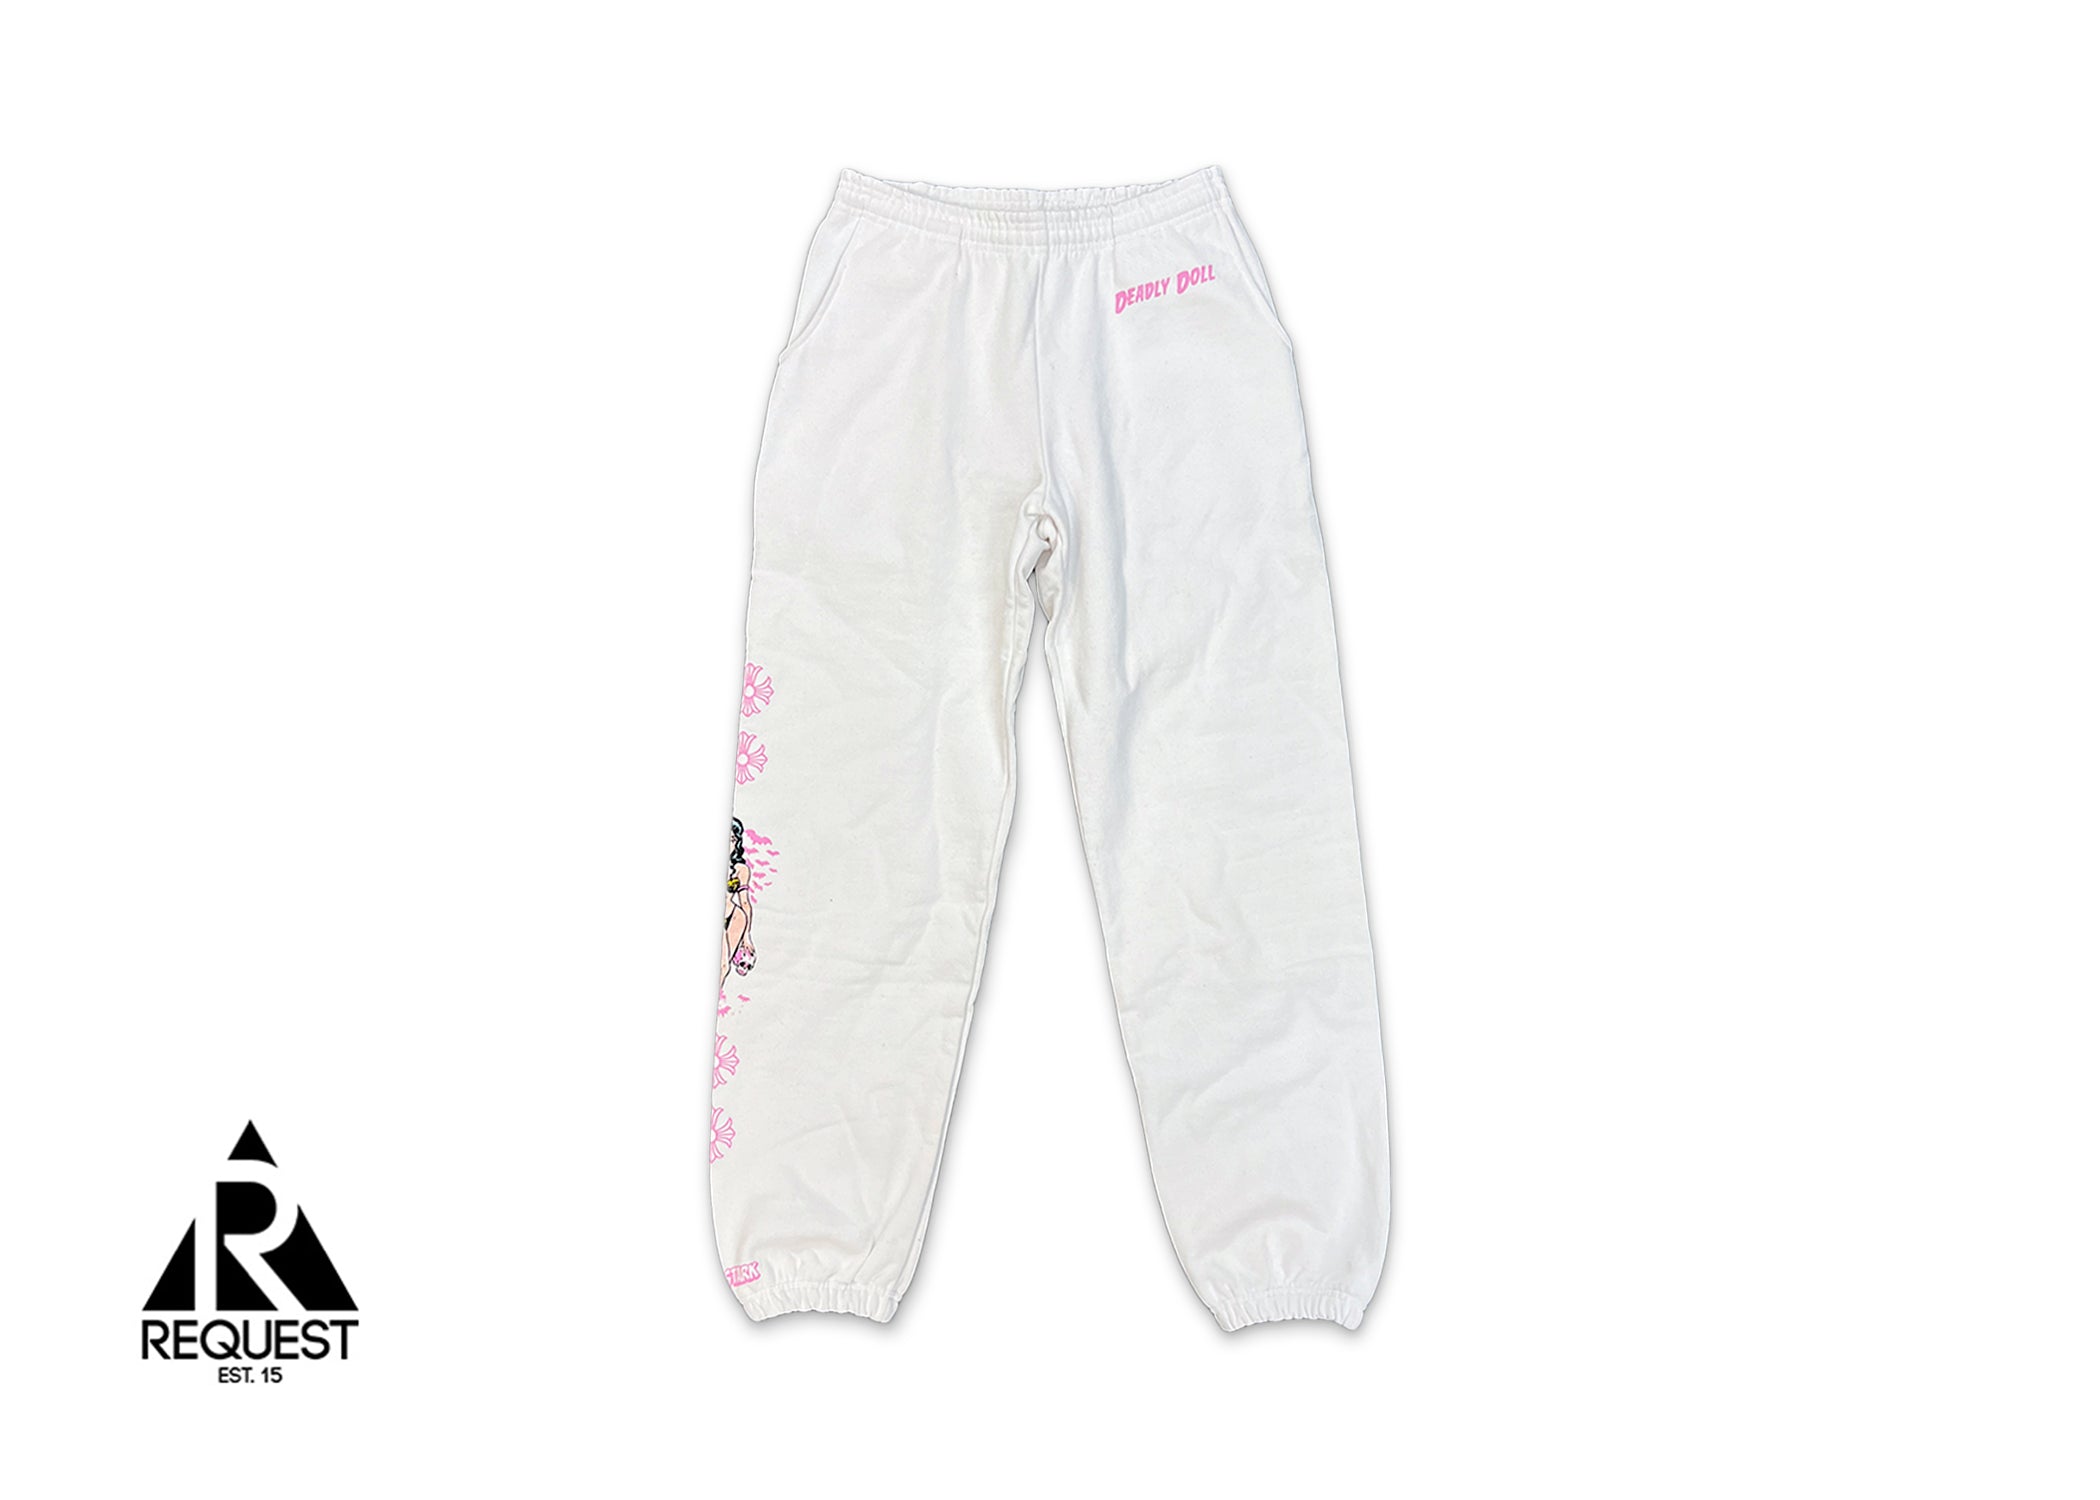 Chrome Hearts Deadly Doll Sweatpants "White/Pink"